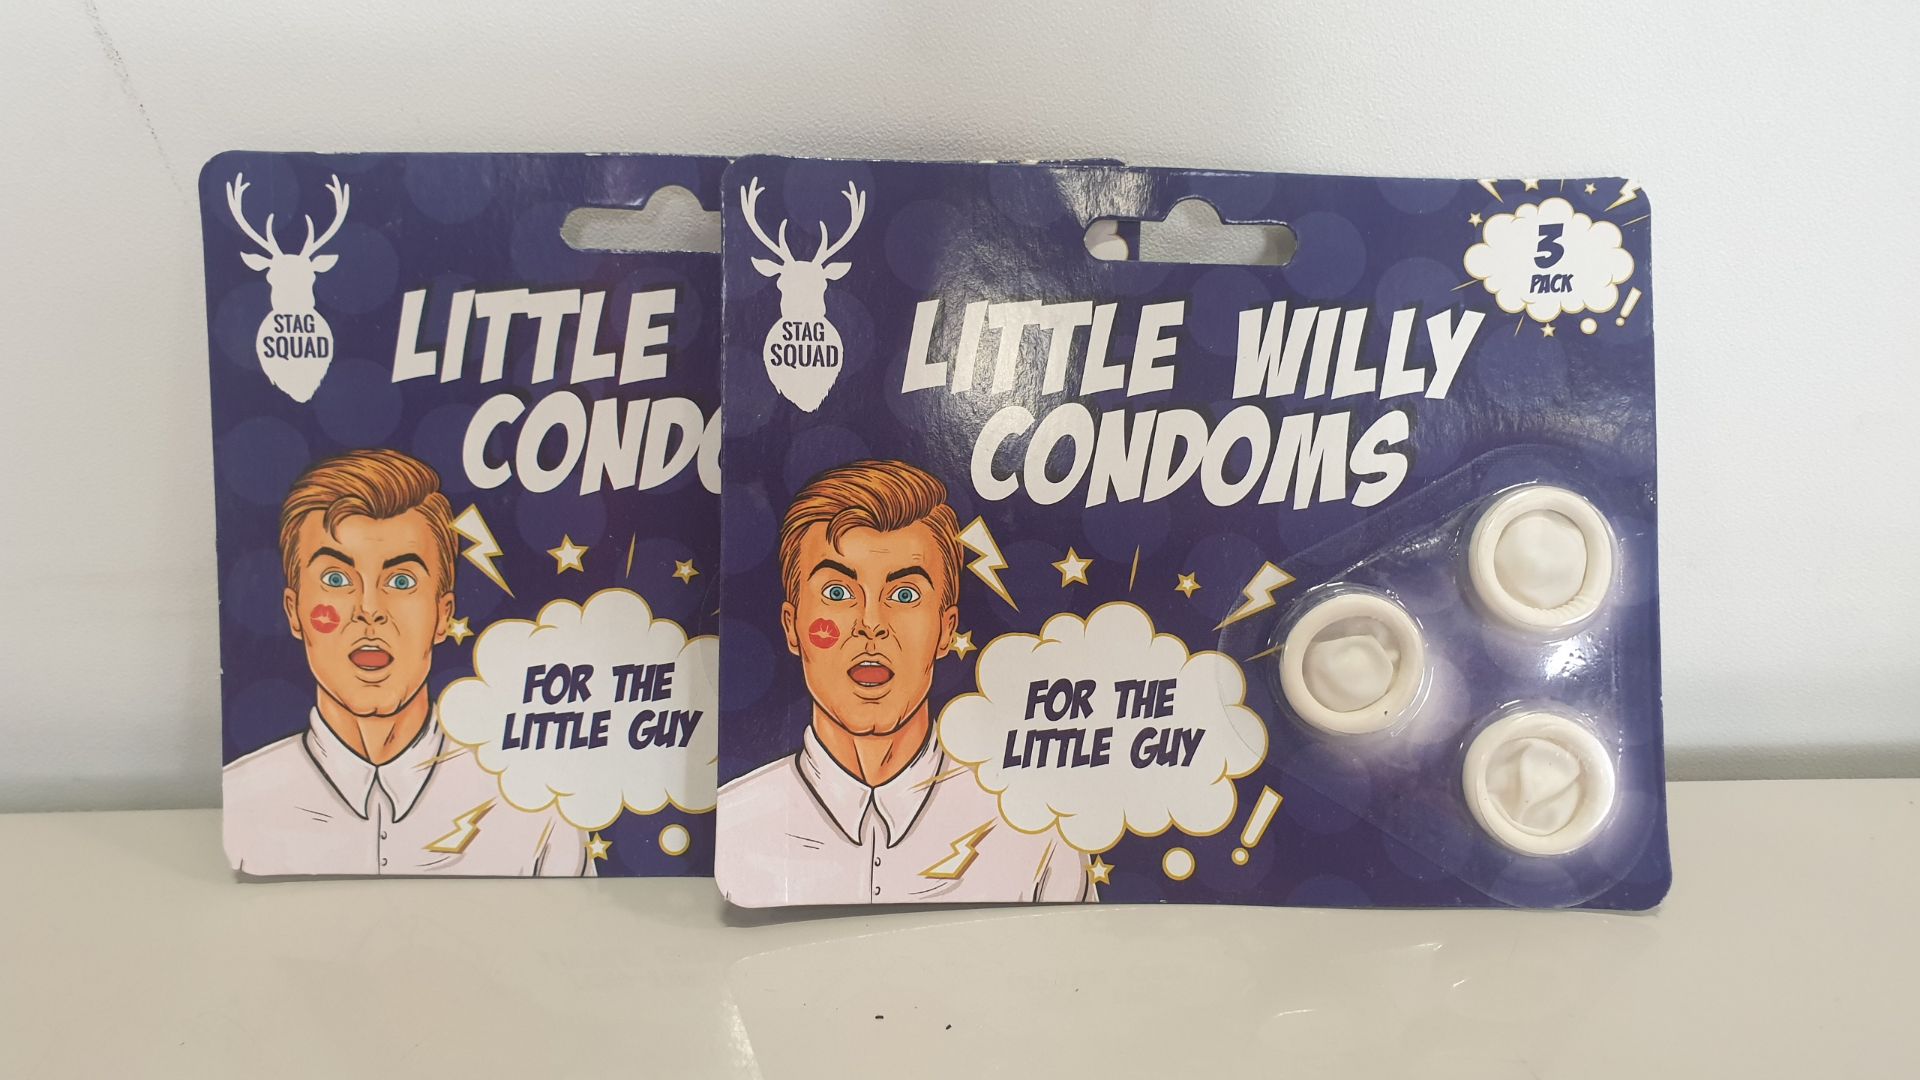 288 X LITTLE WILLY CONDOMS - IN 12 CARTONS OF 24 PCS